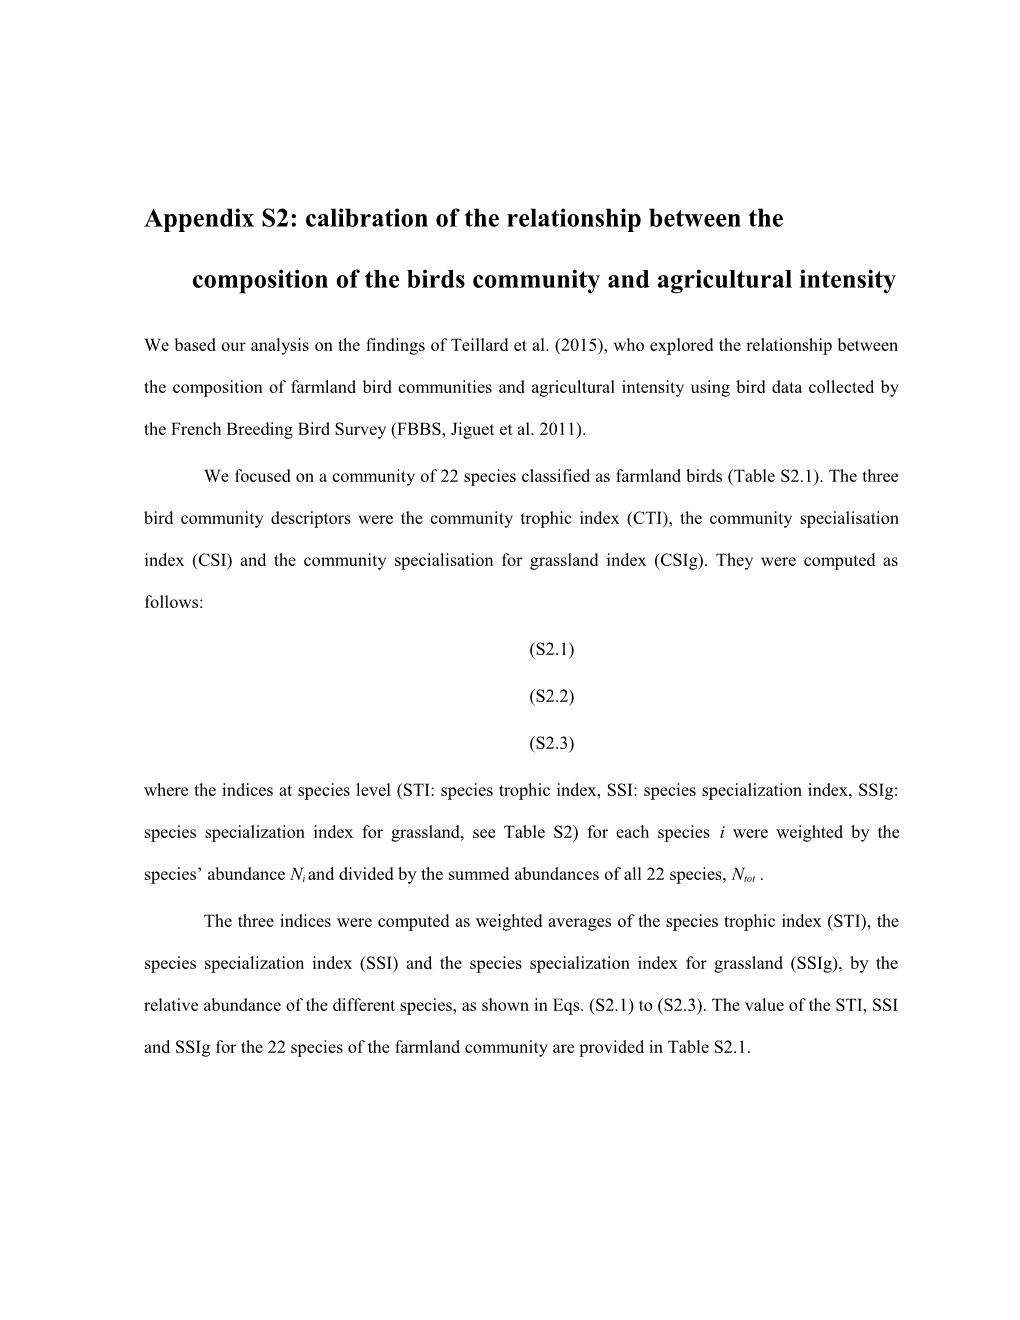 Appendix S2: Calibration of the Relationship Between the Composition of the Birds Community